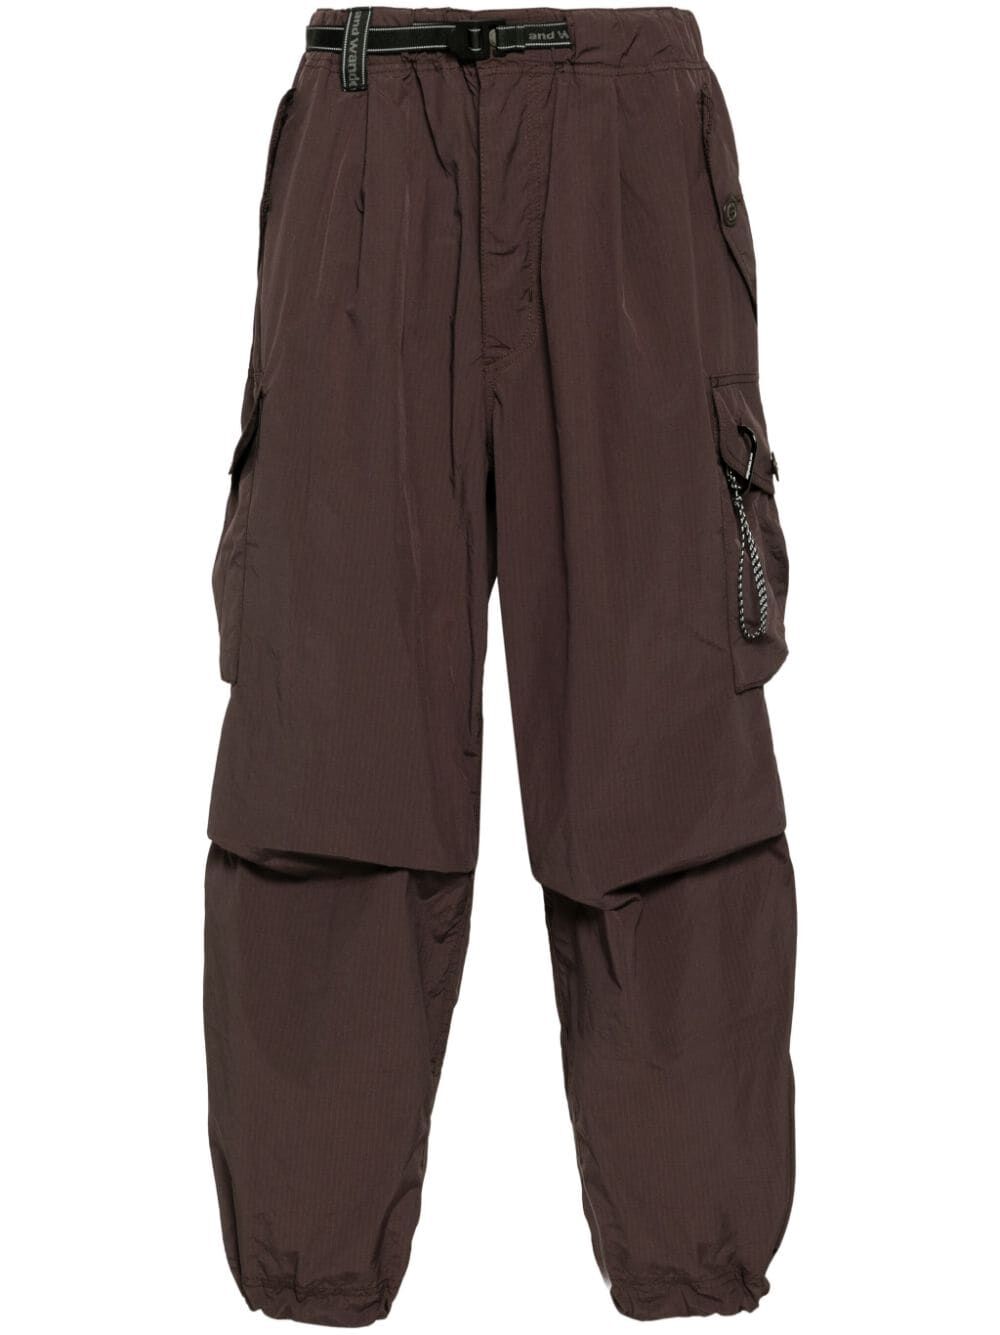 AND WANDER-82 oversized cargo pants-